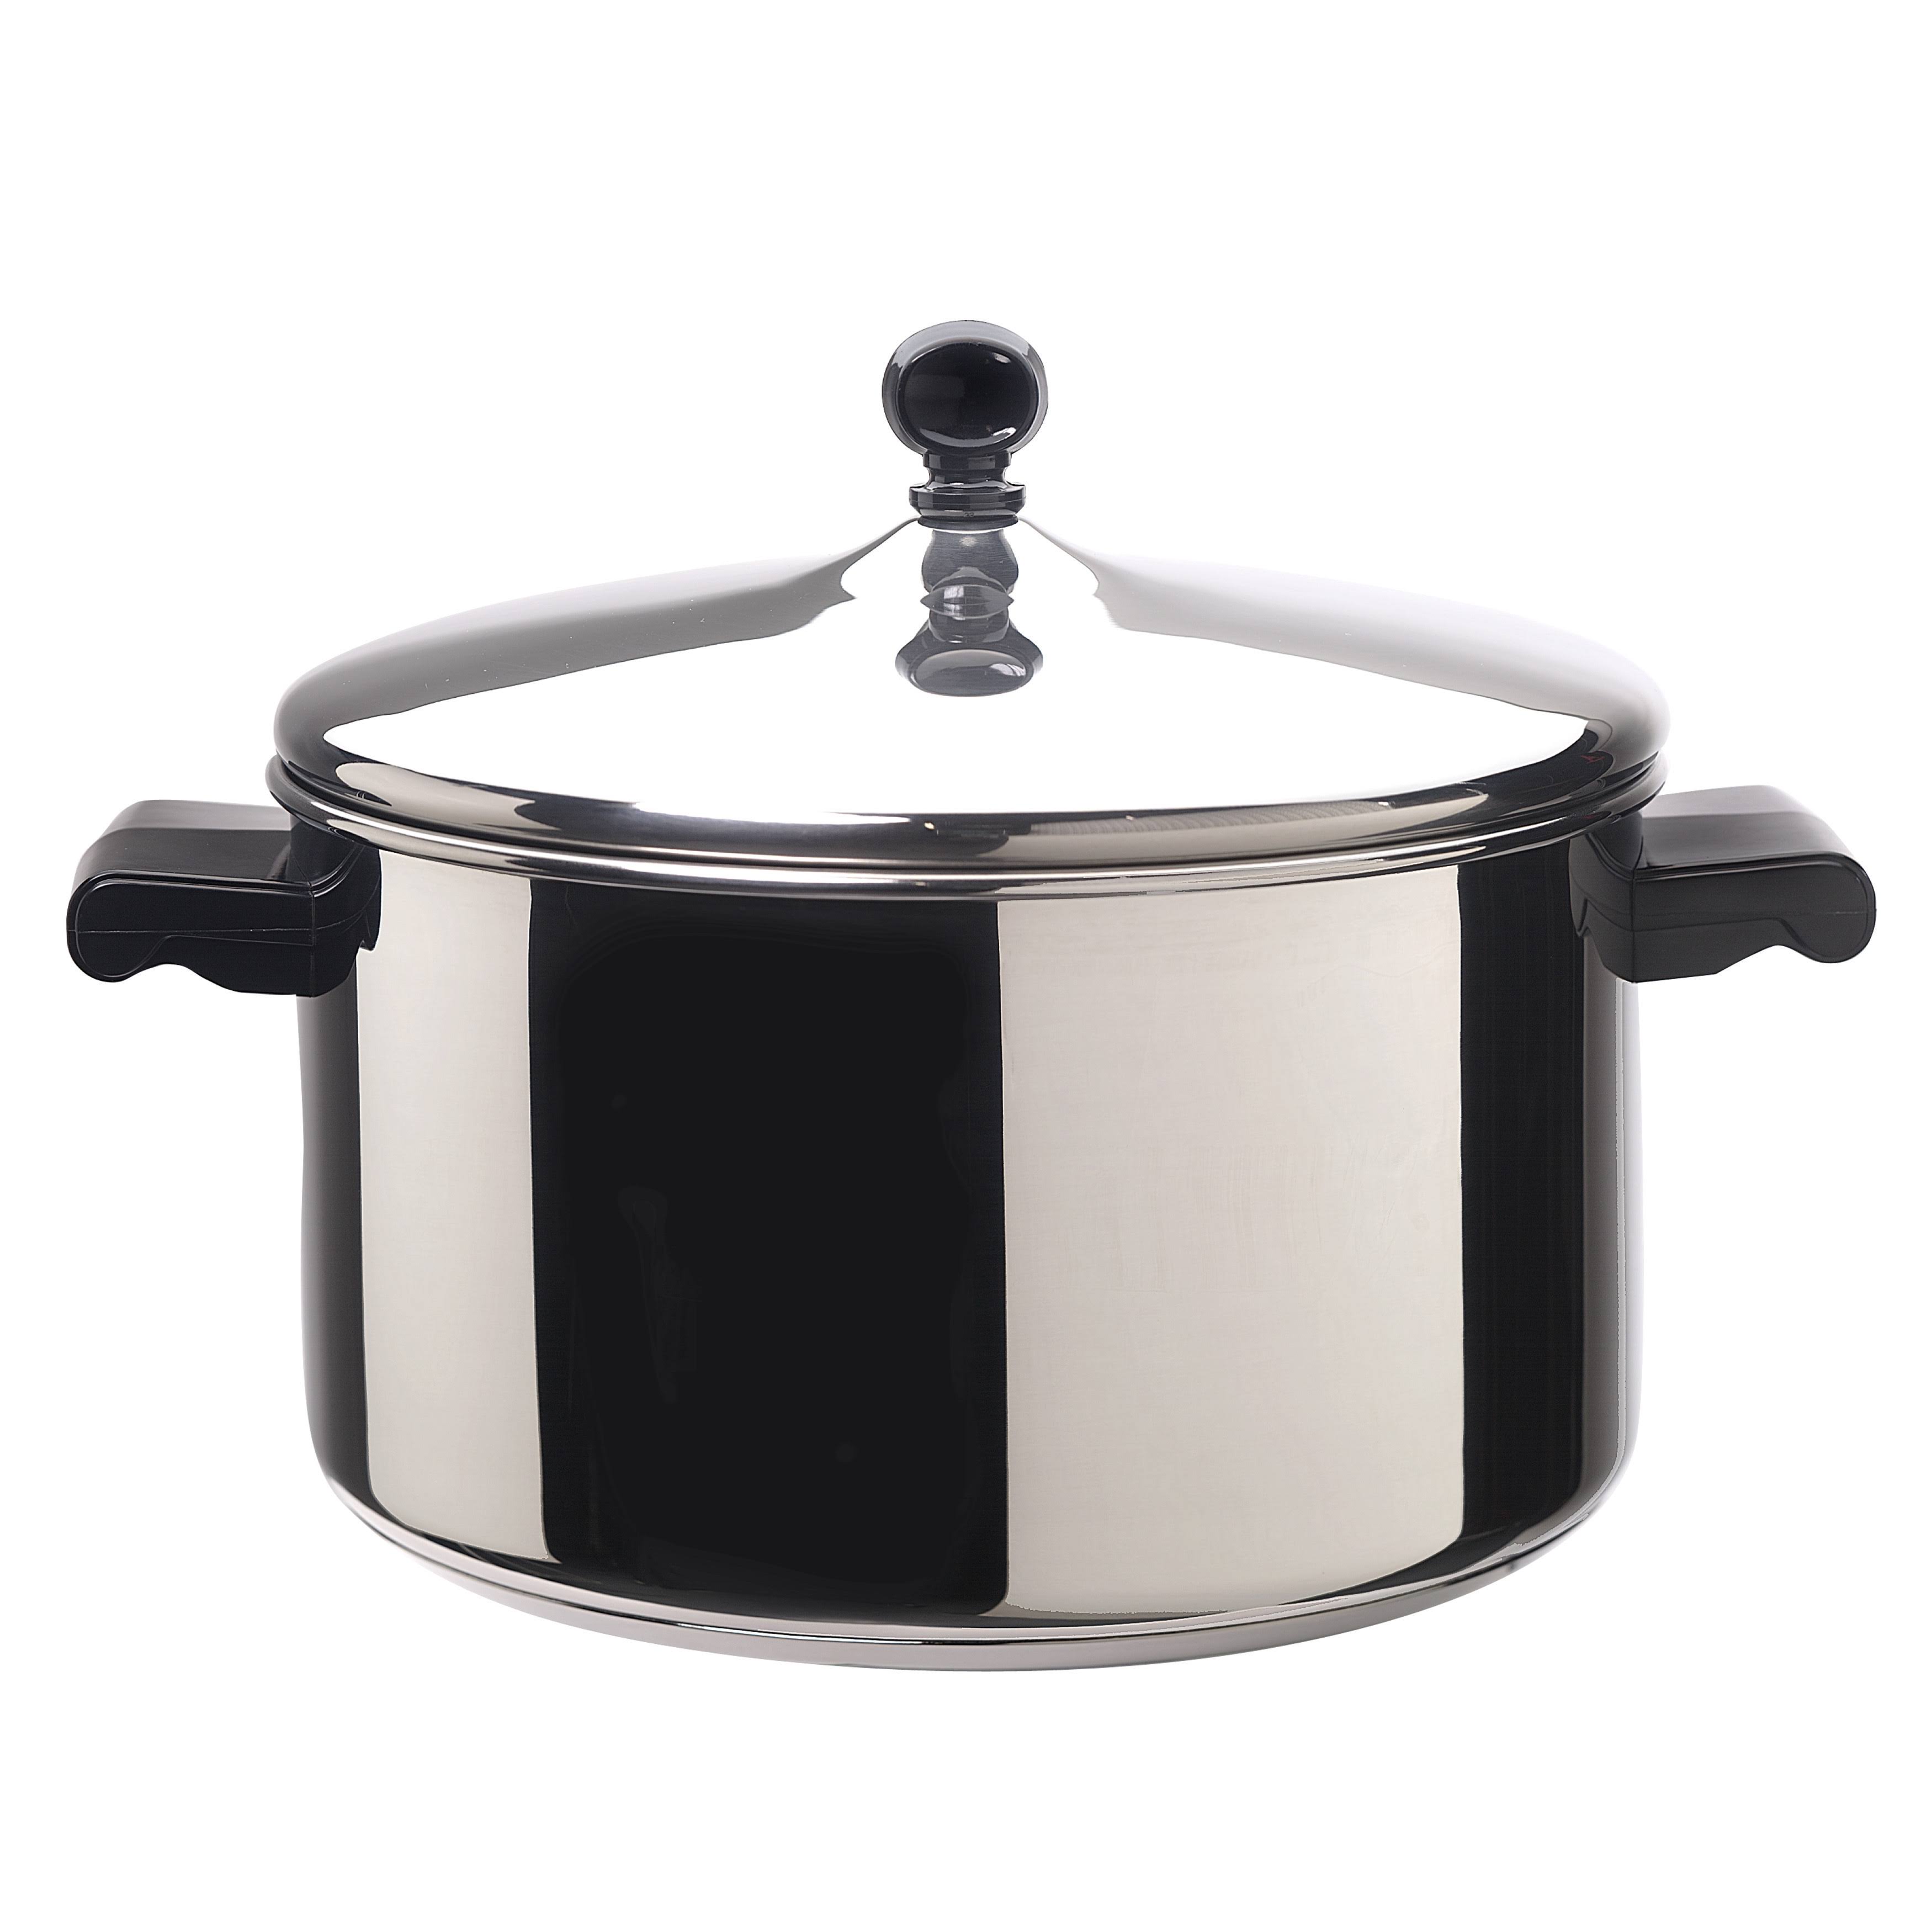 Farberware Classic Covered Stockpot - Stainless Steel, 6qt